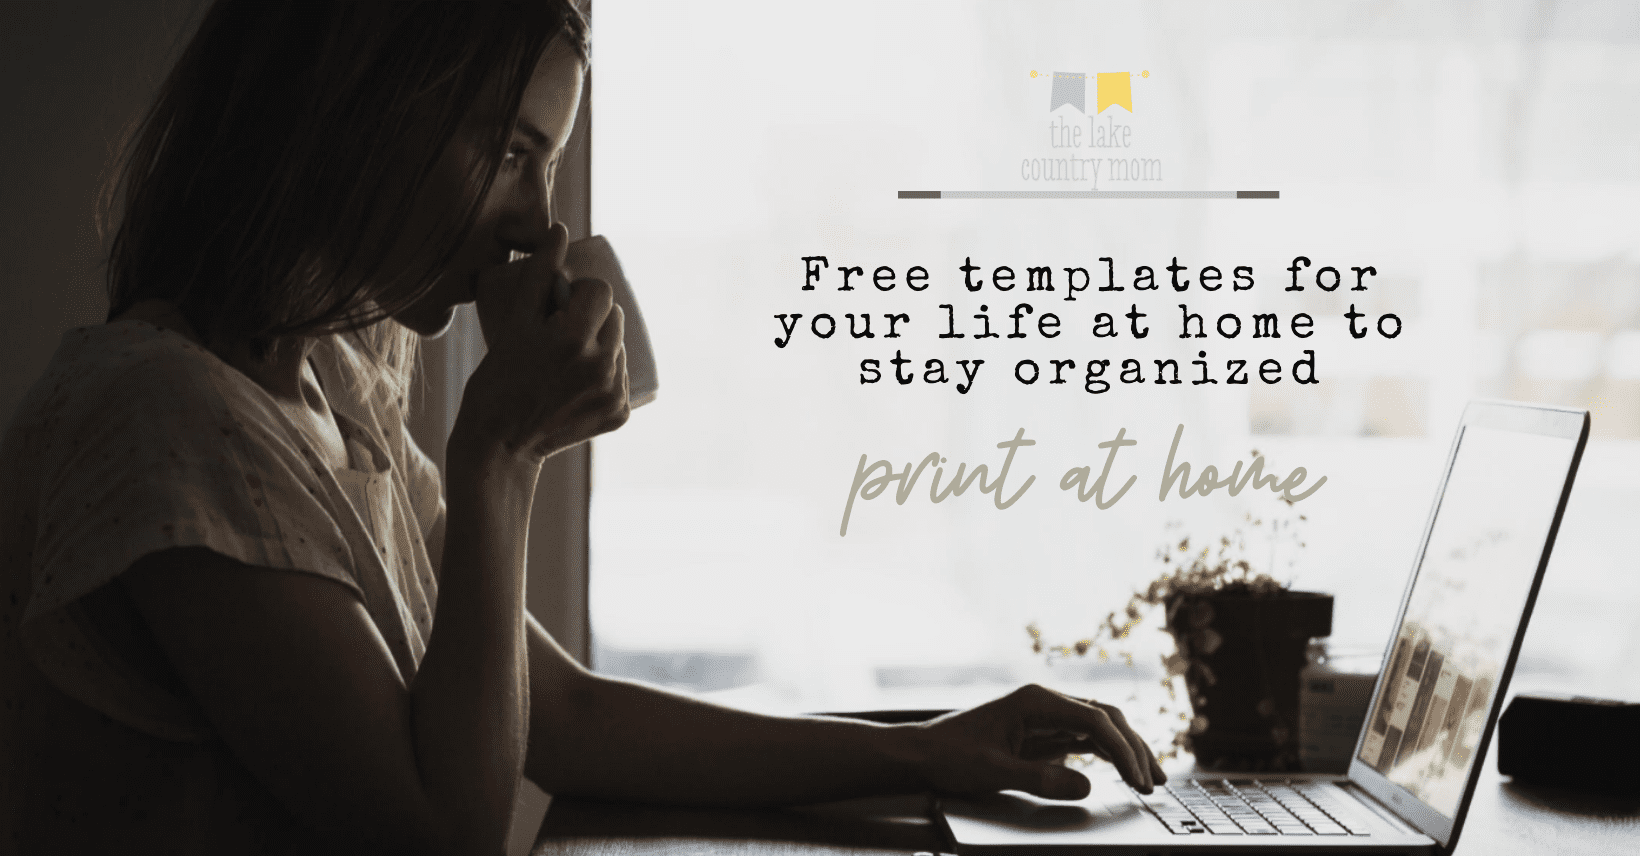 Free templates for your life at home to stay organized